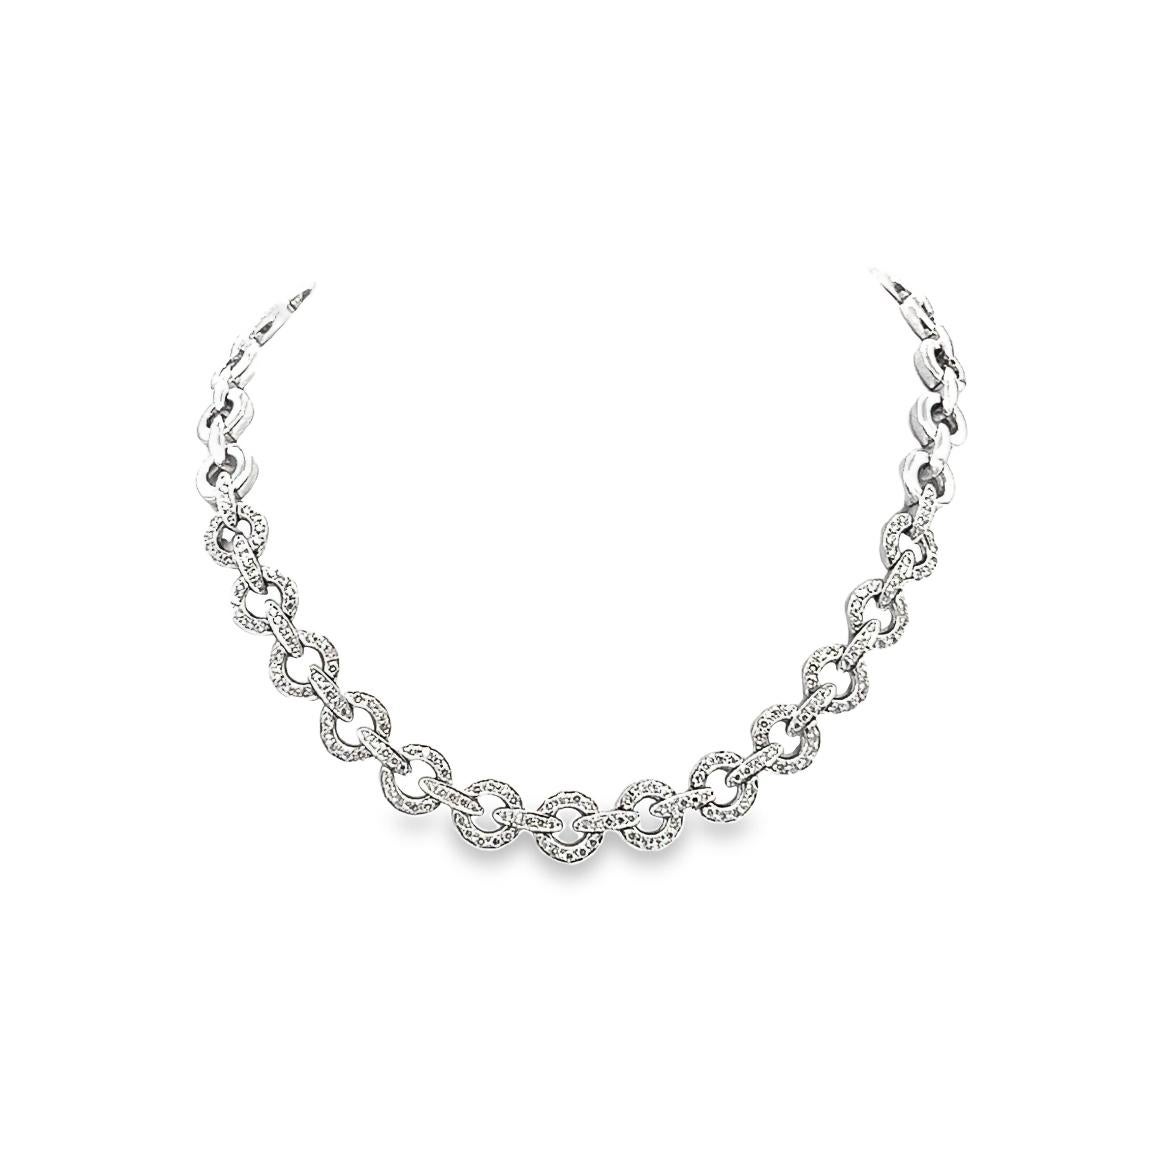 Are you looking for a stunning set of diamond jewelry to add to your collection? Look no further! This one-of-a-kind Choker Diamond Necklace with a matching Diamond Bracelet is exactly what you need. Both items have a weight of 123.2 grams and carry